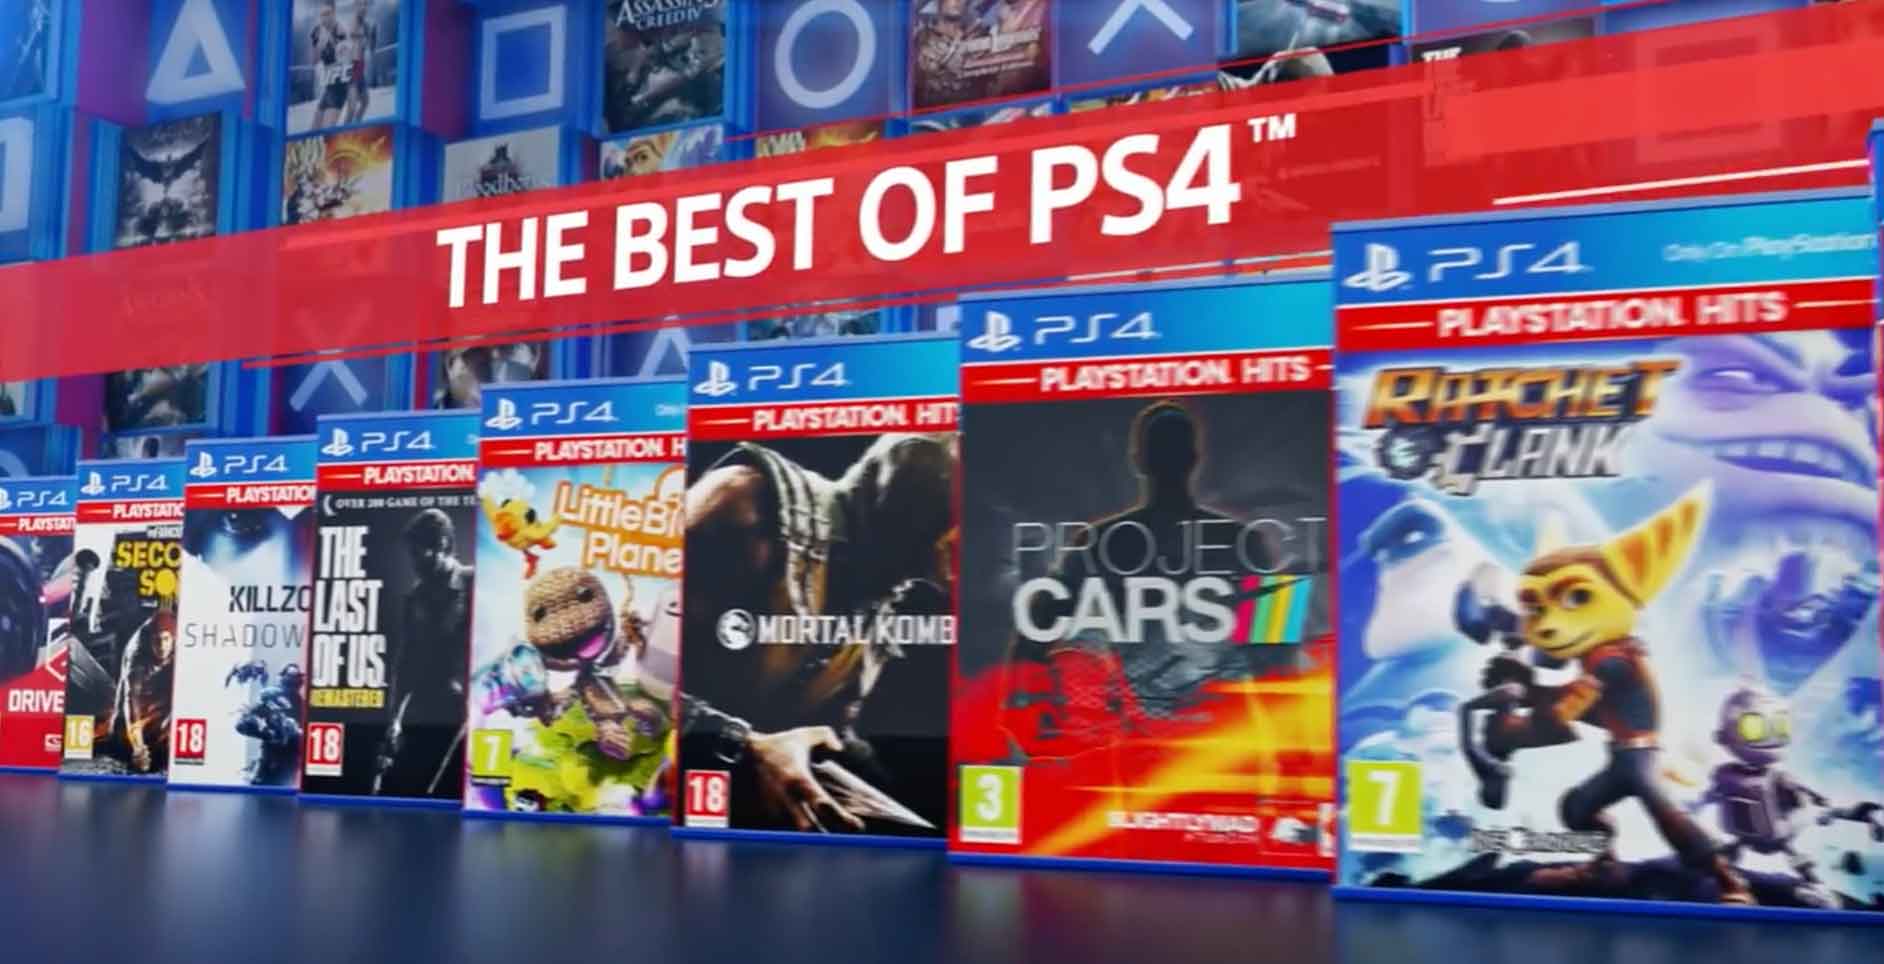 Sony launches PS4 greatest hits line with $20 games - Polygon